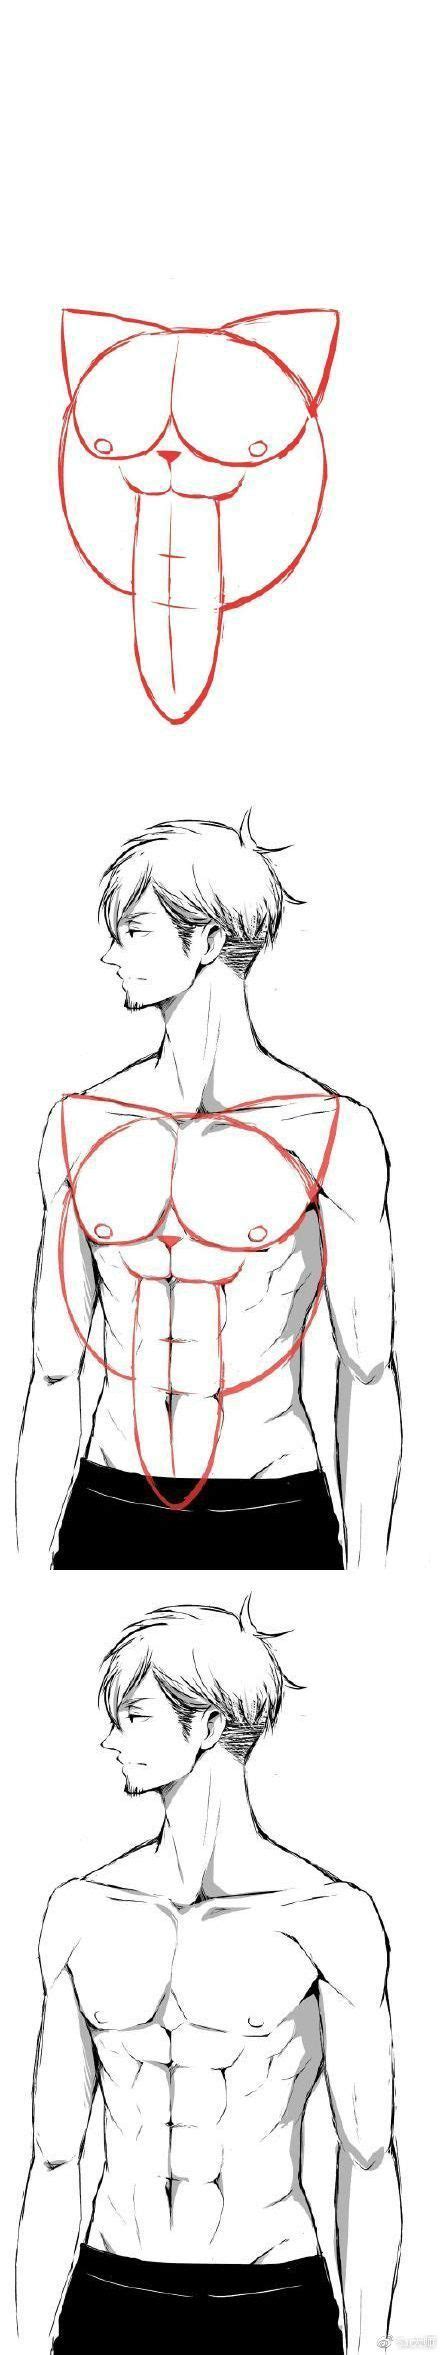 Esboço Masculino Drawing Tutorial Art Reference Poses Art Reference